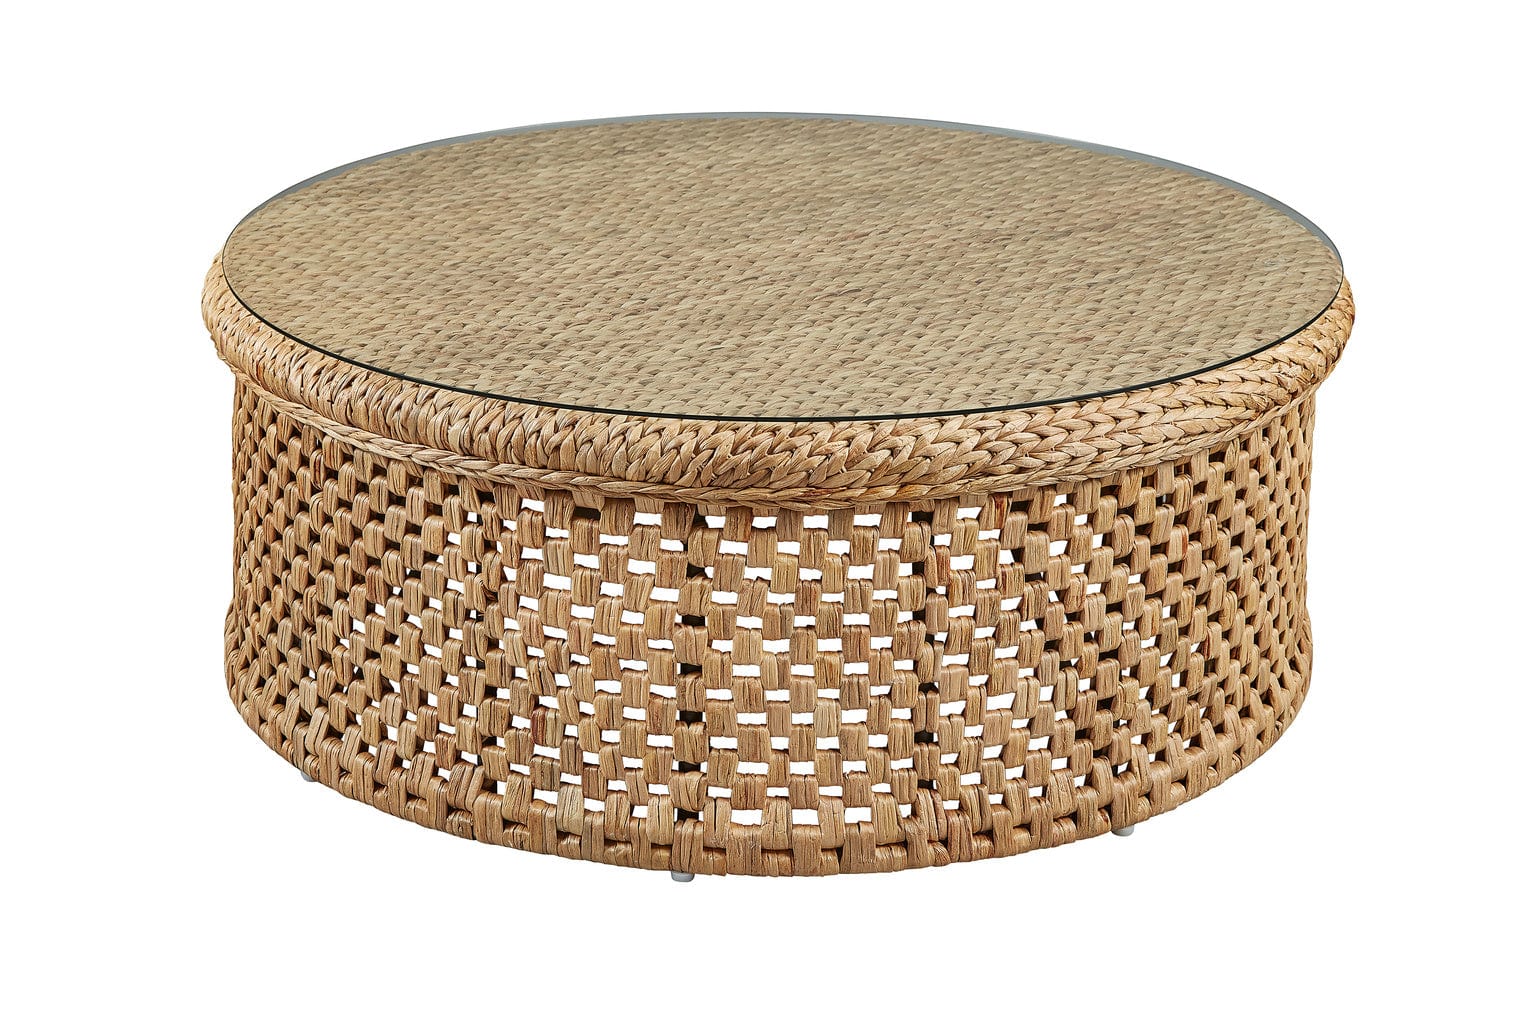 Round Rattan Coffee Table With Glass Top English Country Home